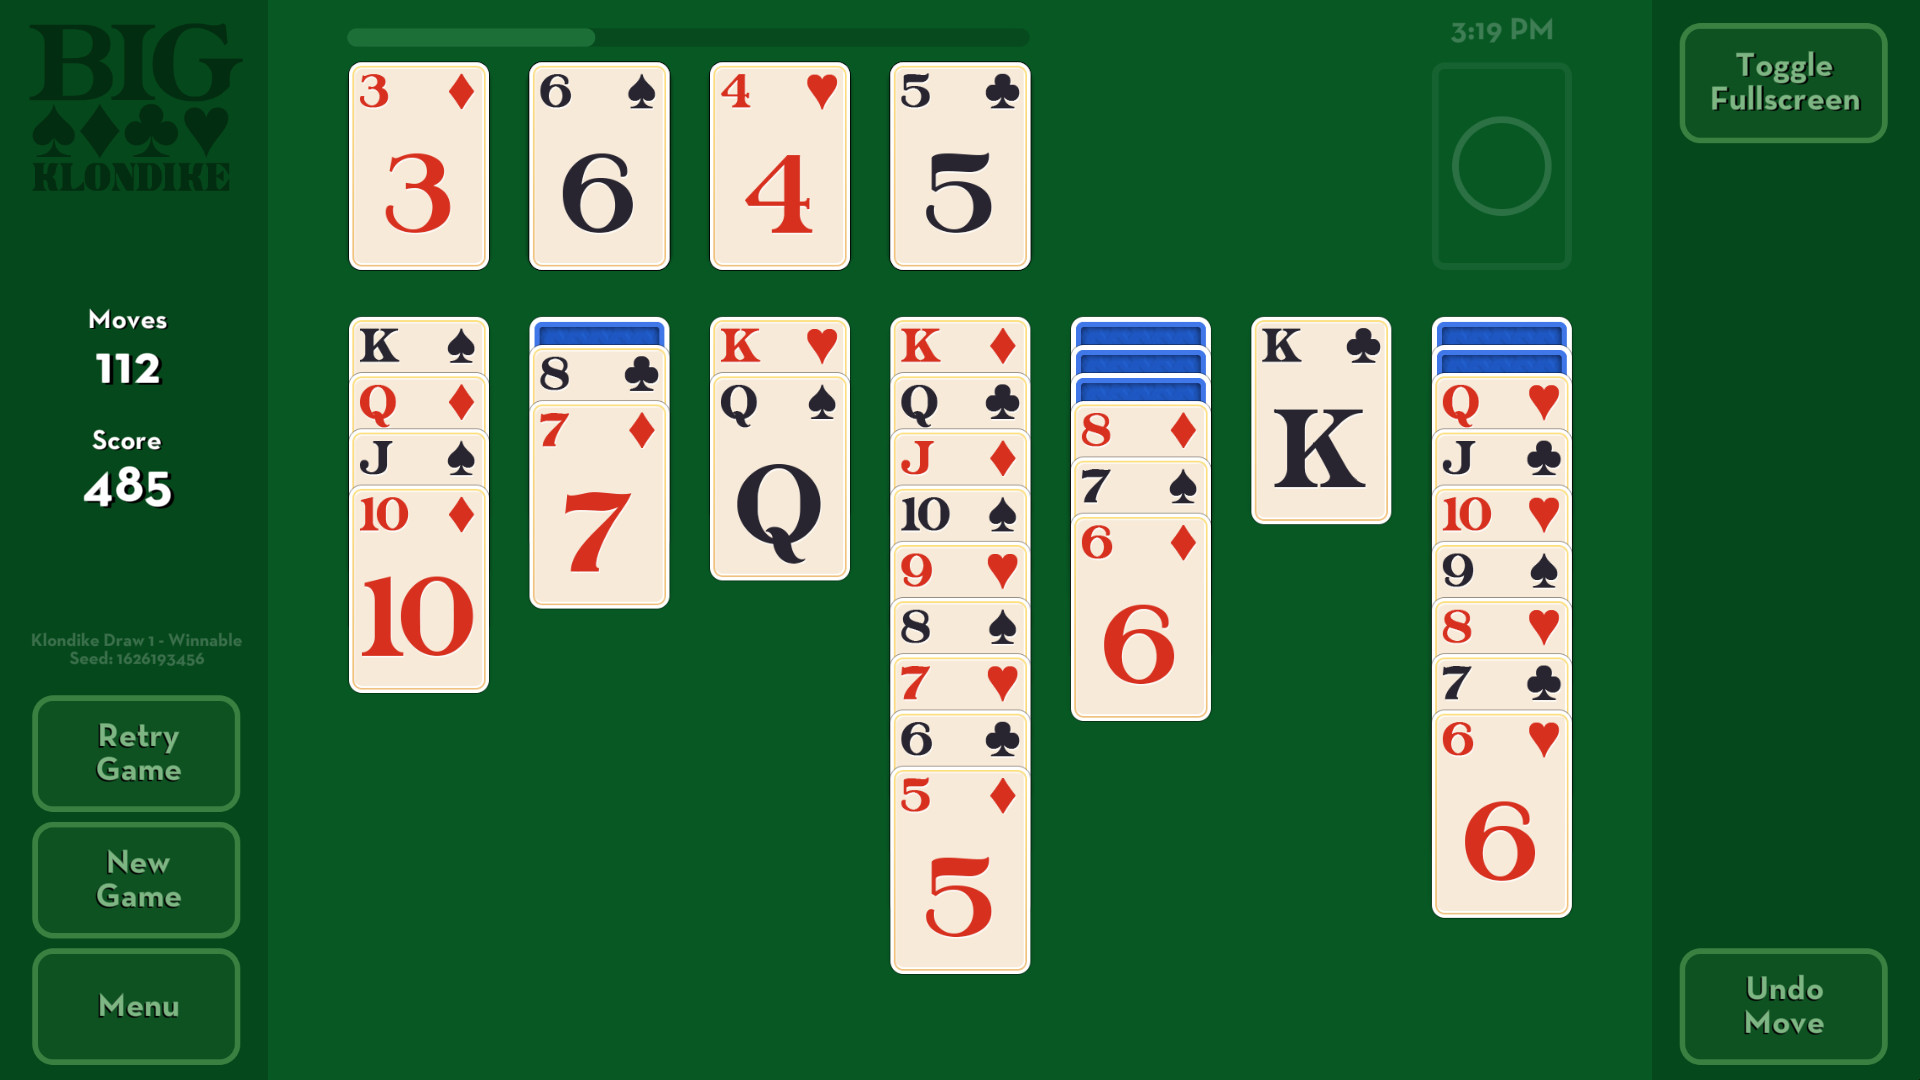 Play Bite-Sized Solitaire Classic Online Now - GameSnacks